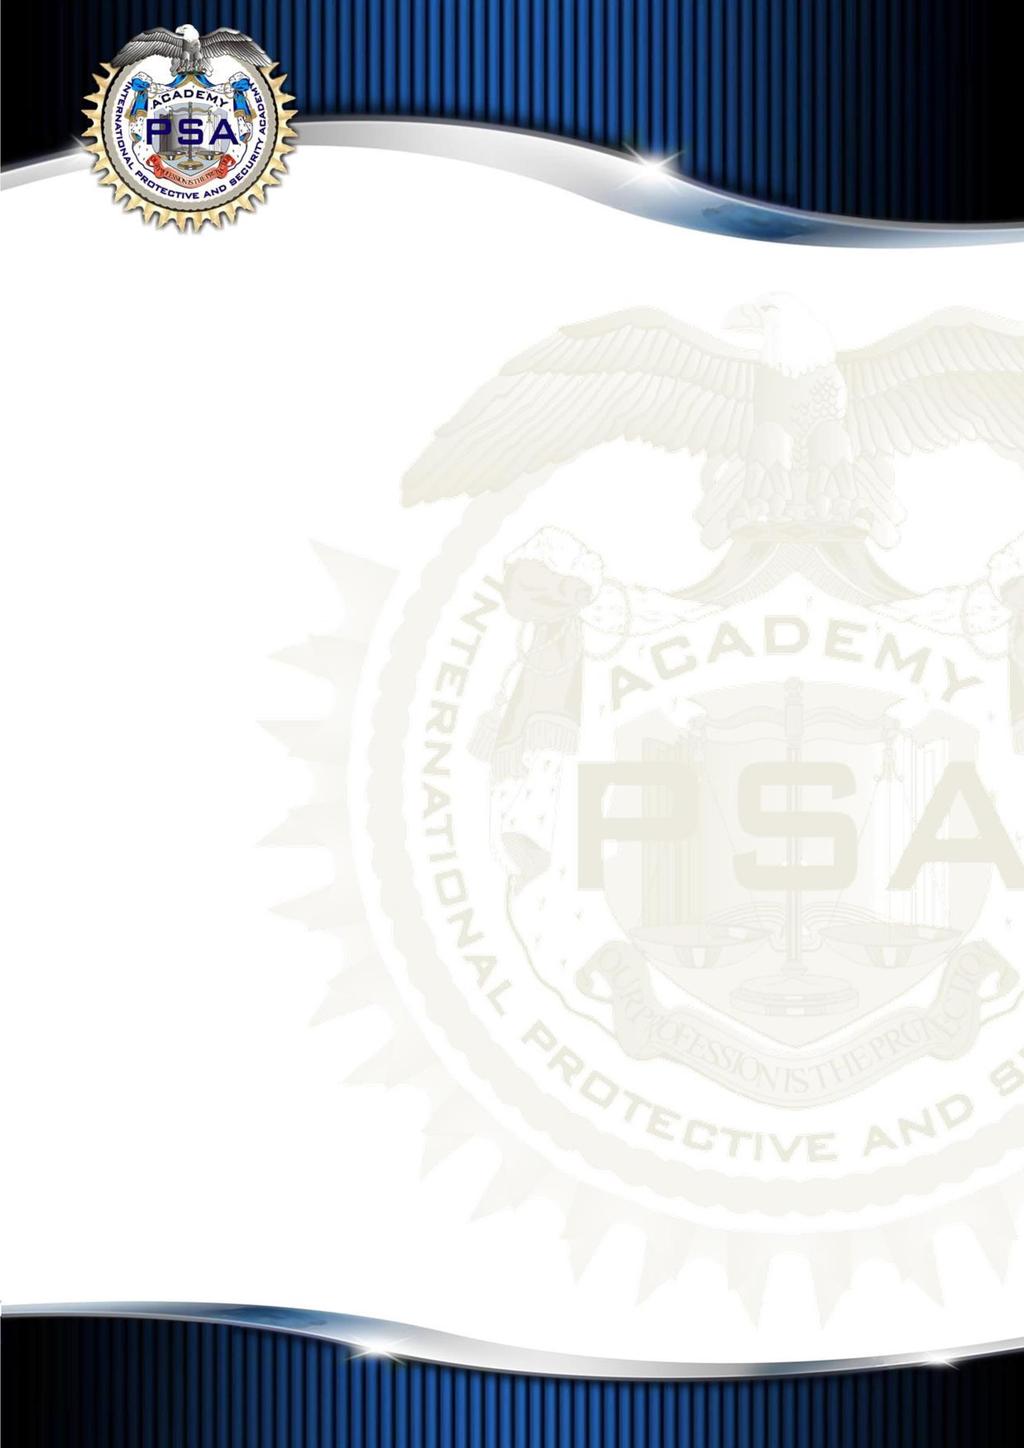 BODYGUARD TRAINING PROGRAM ACCREDITATION: Our training is professional, realistic and quality based and no